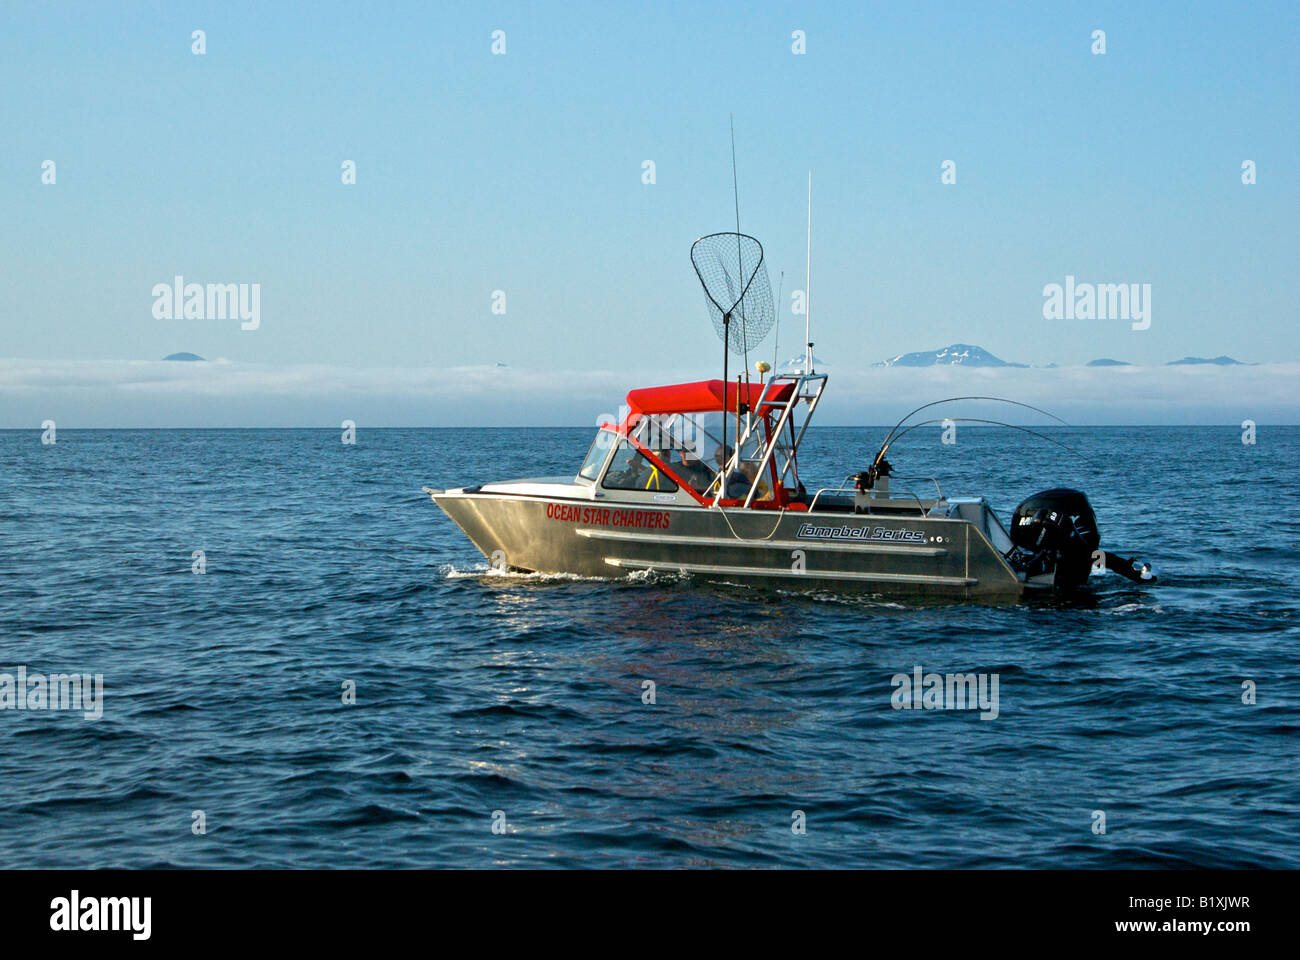 Sport fish charter boat troll fishing for salmon using downriggers and rods with single action reels Stock Photo